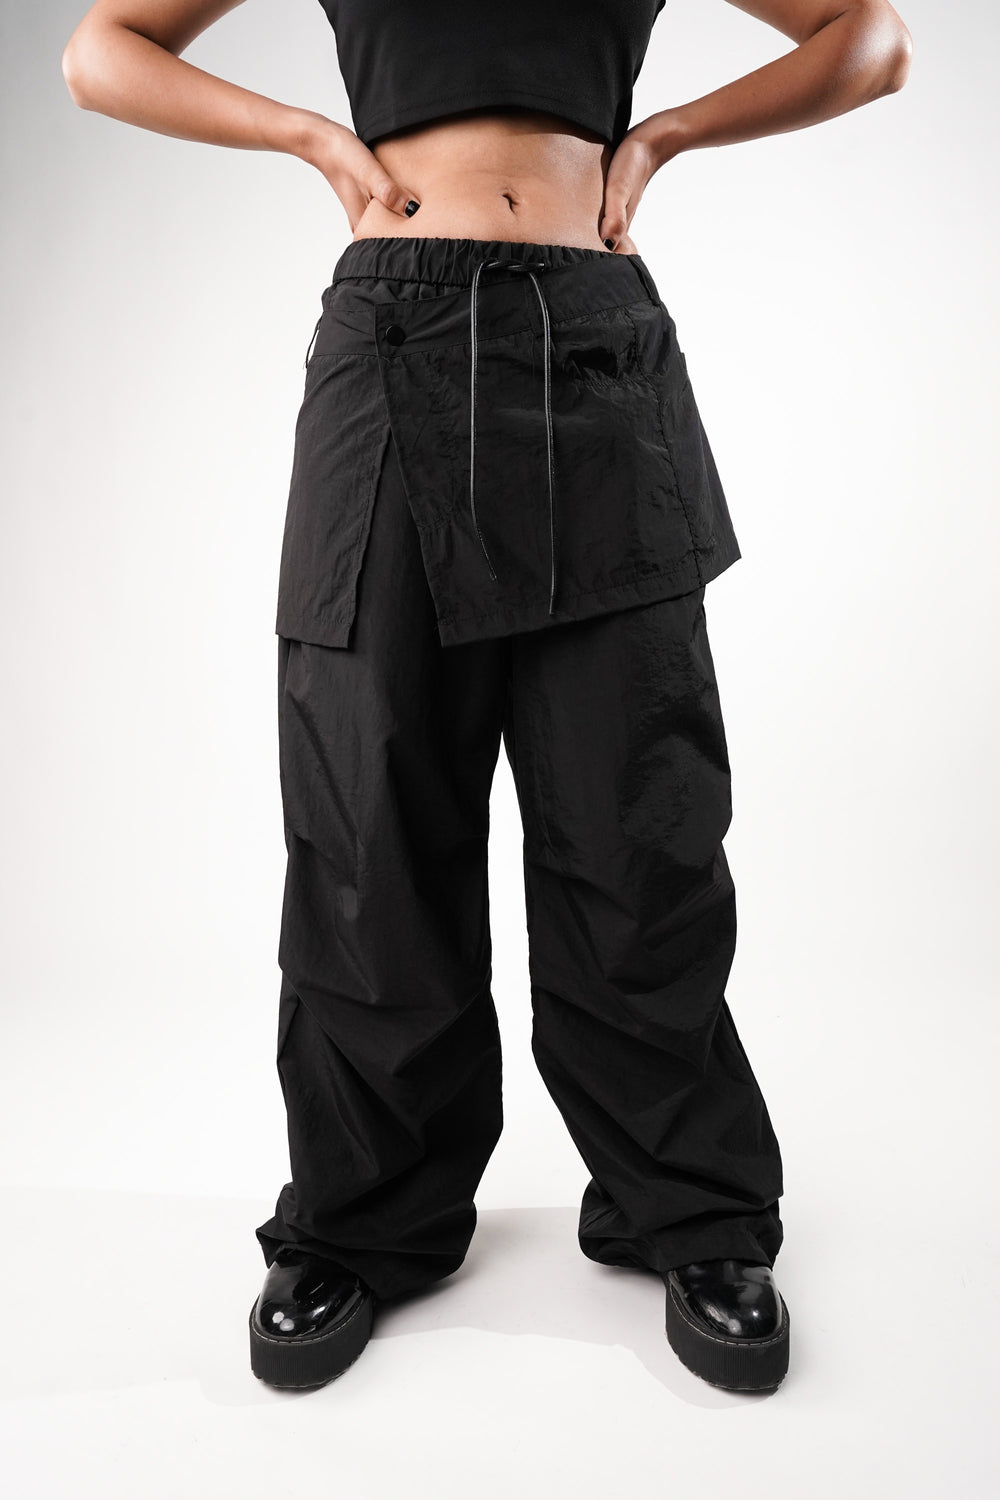 Layered black cargo pants with skirt